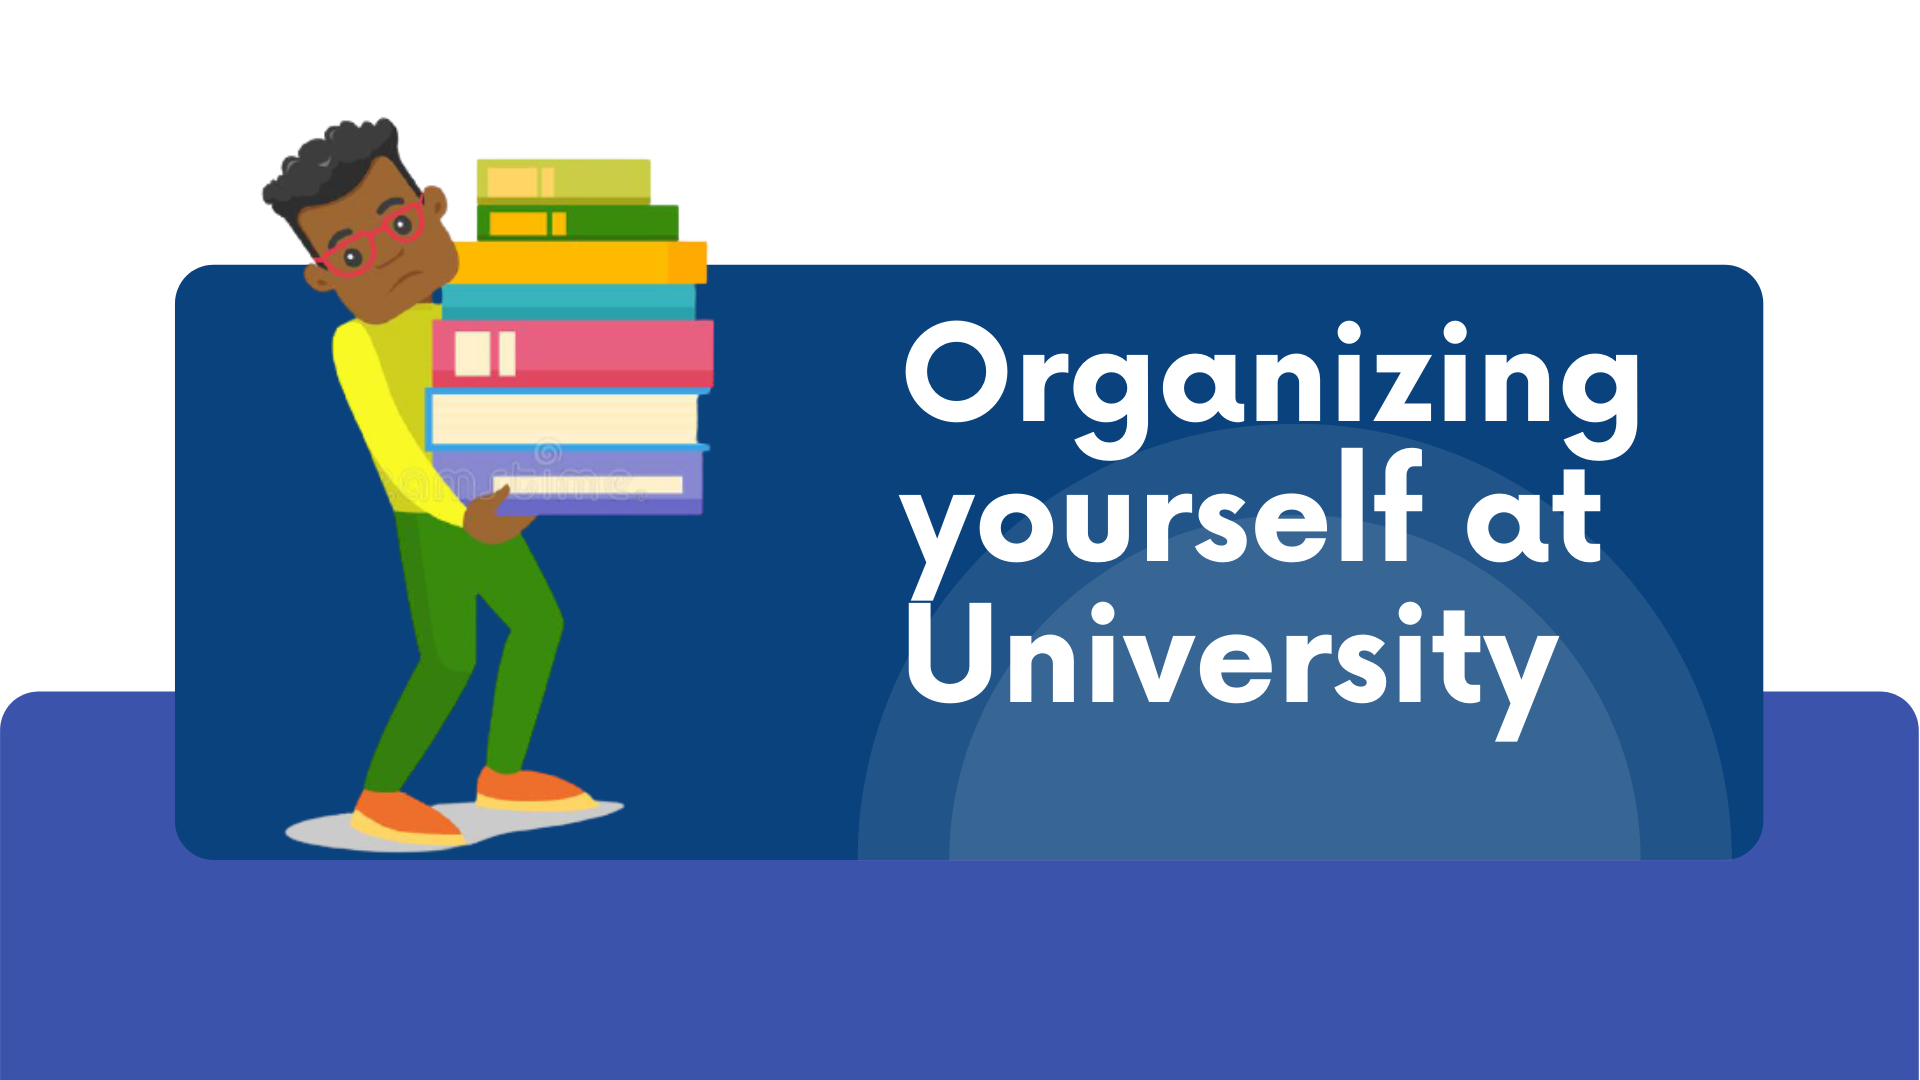 tips to organize yourself better during university